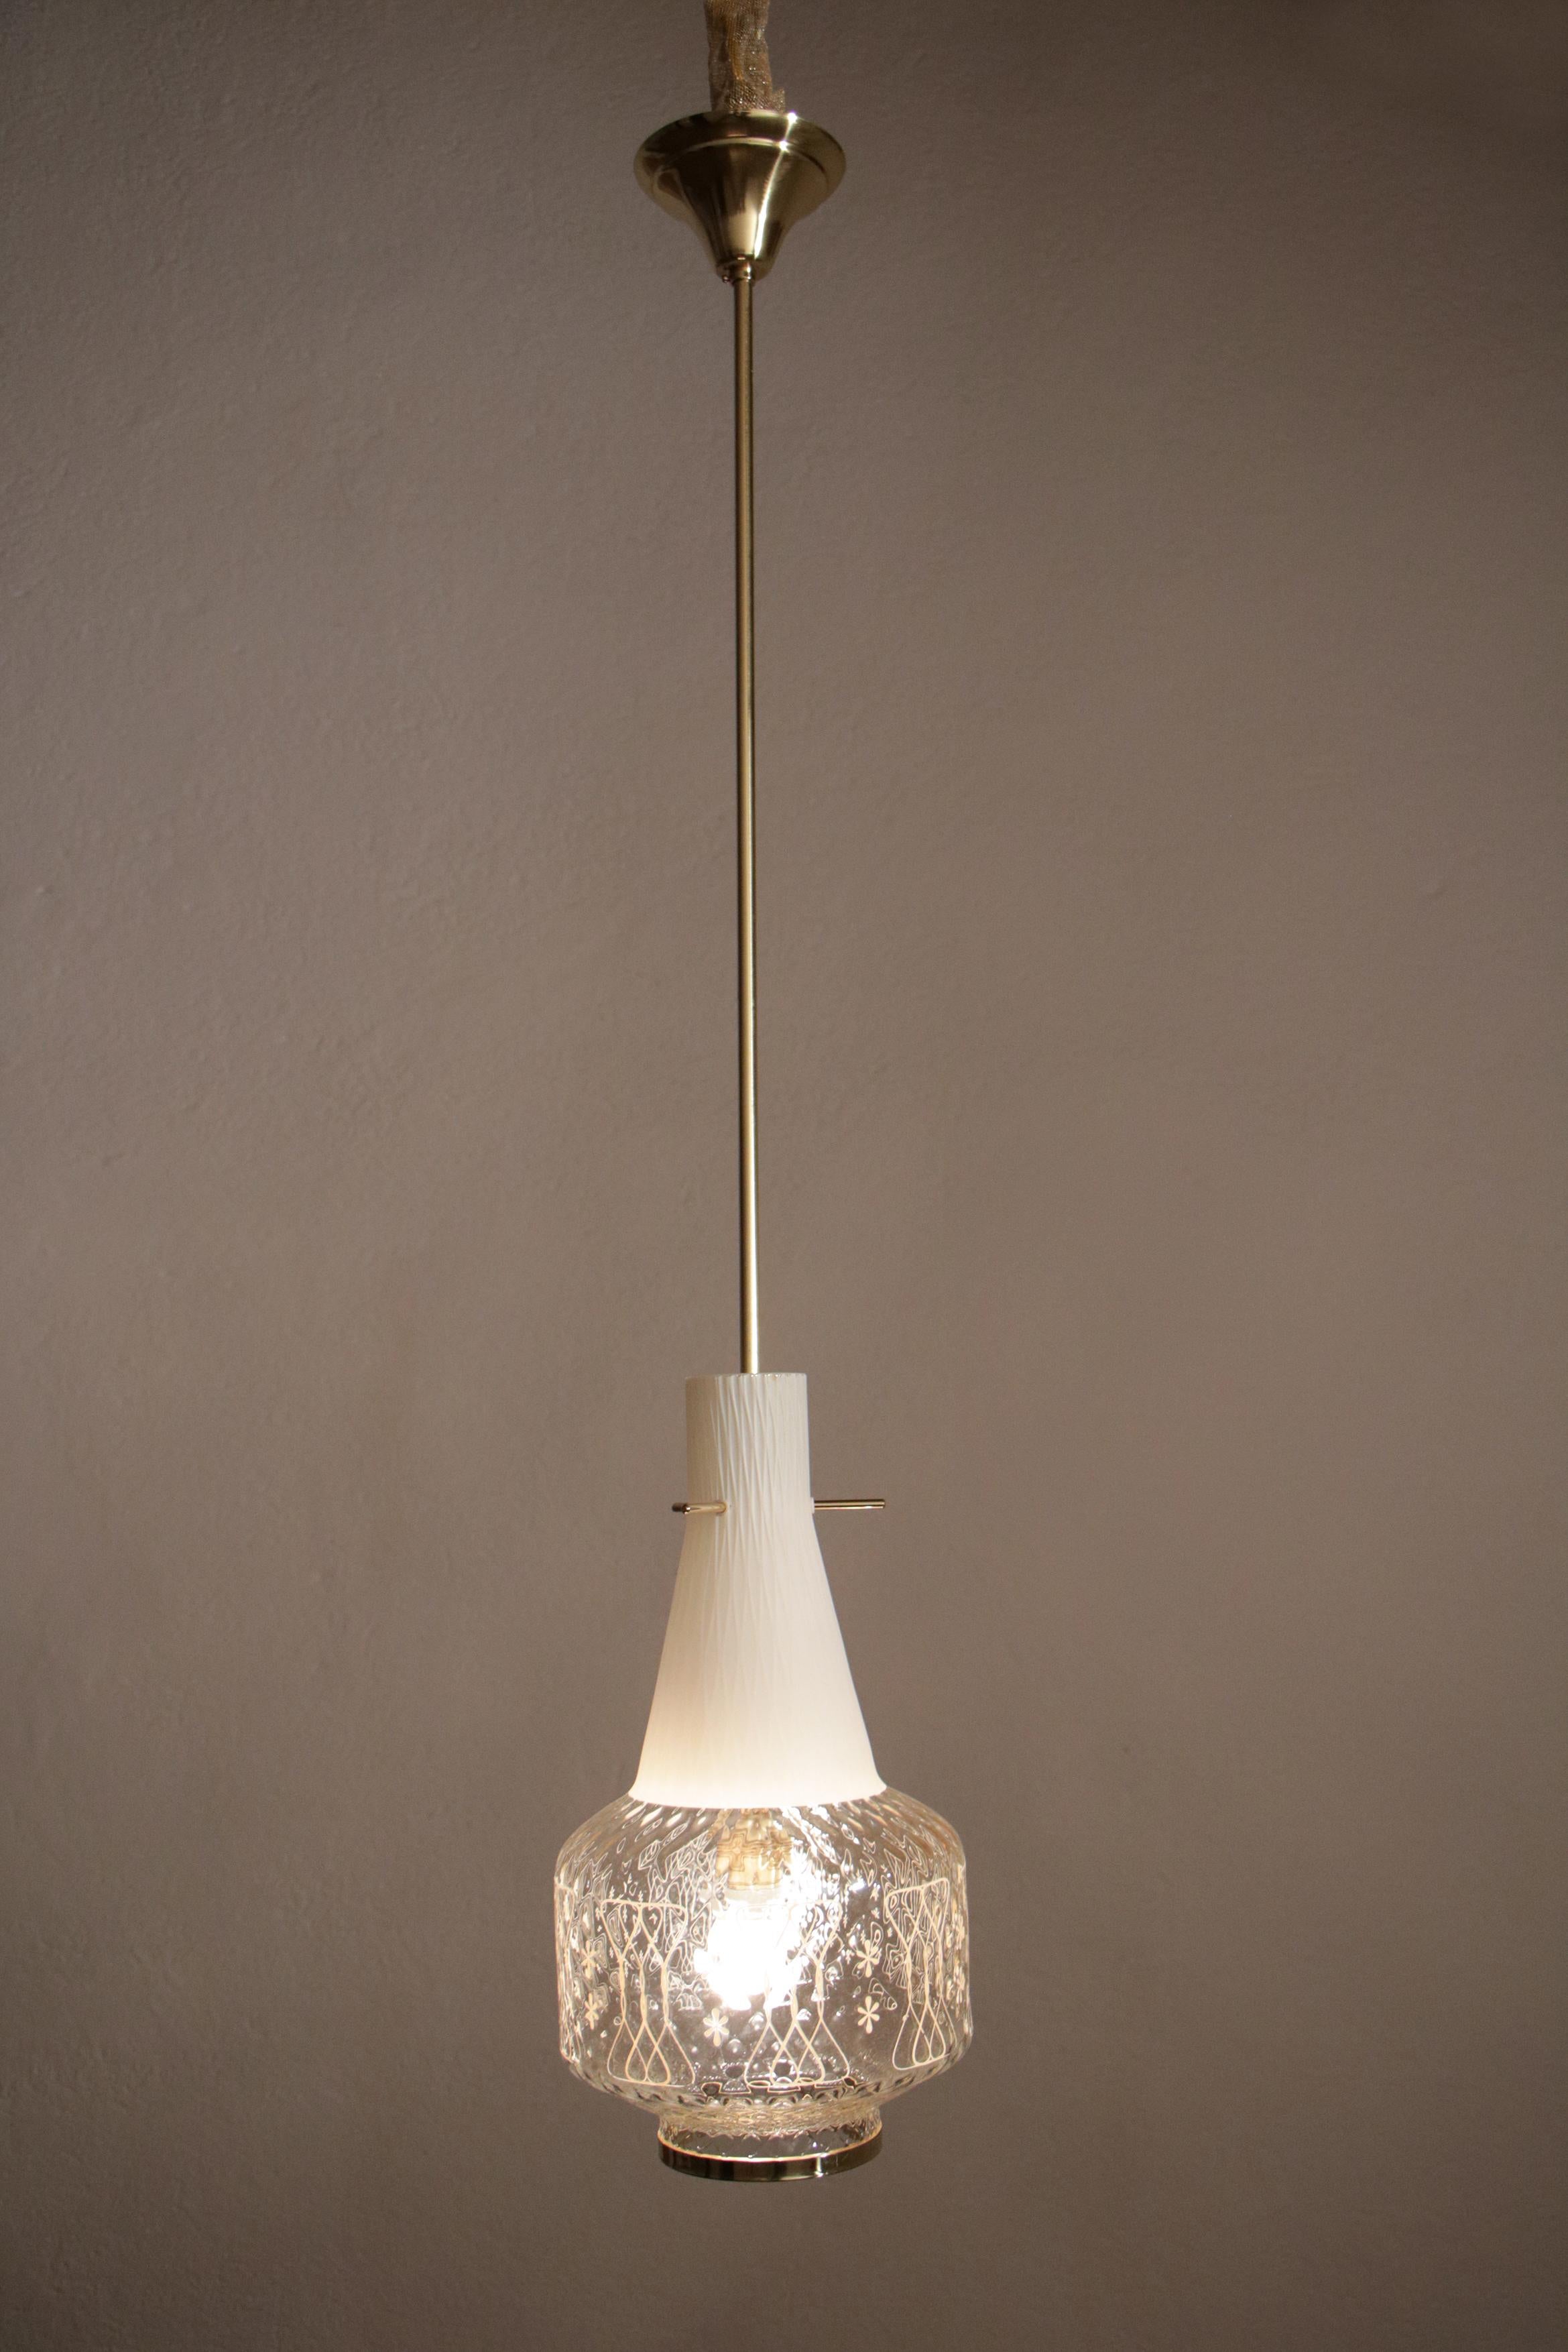 Polished Italian Art Deco Decorative and Satin Glass Hanging Lamp, 1950s For Sale